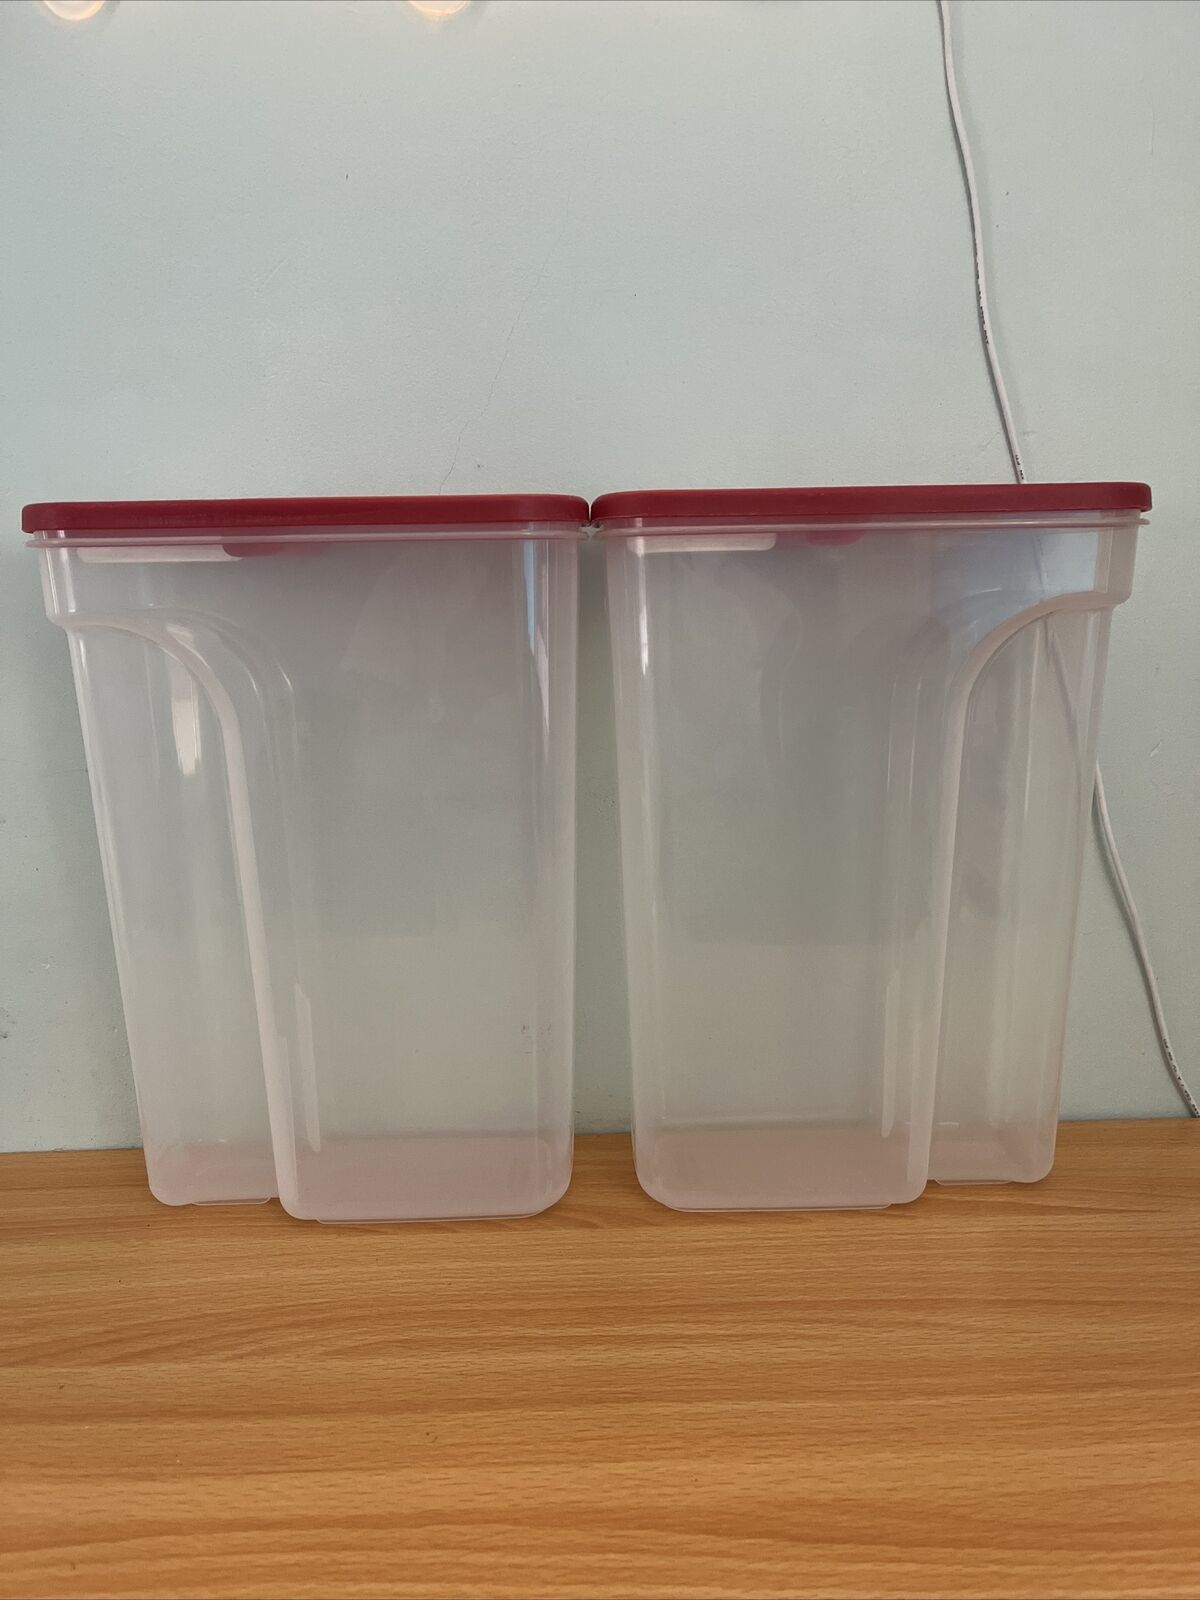 Tupperware Modular Oval Clear Storage Containers With Red Lids-Set of 2